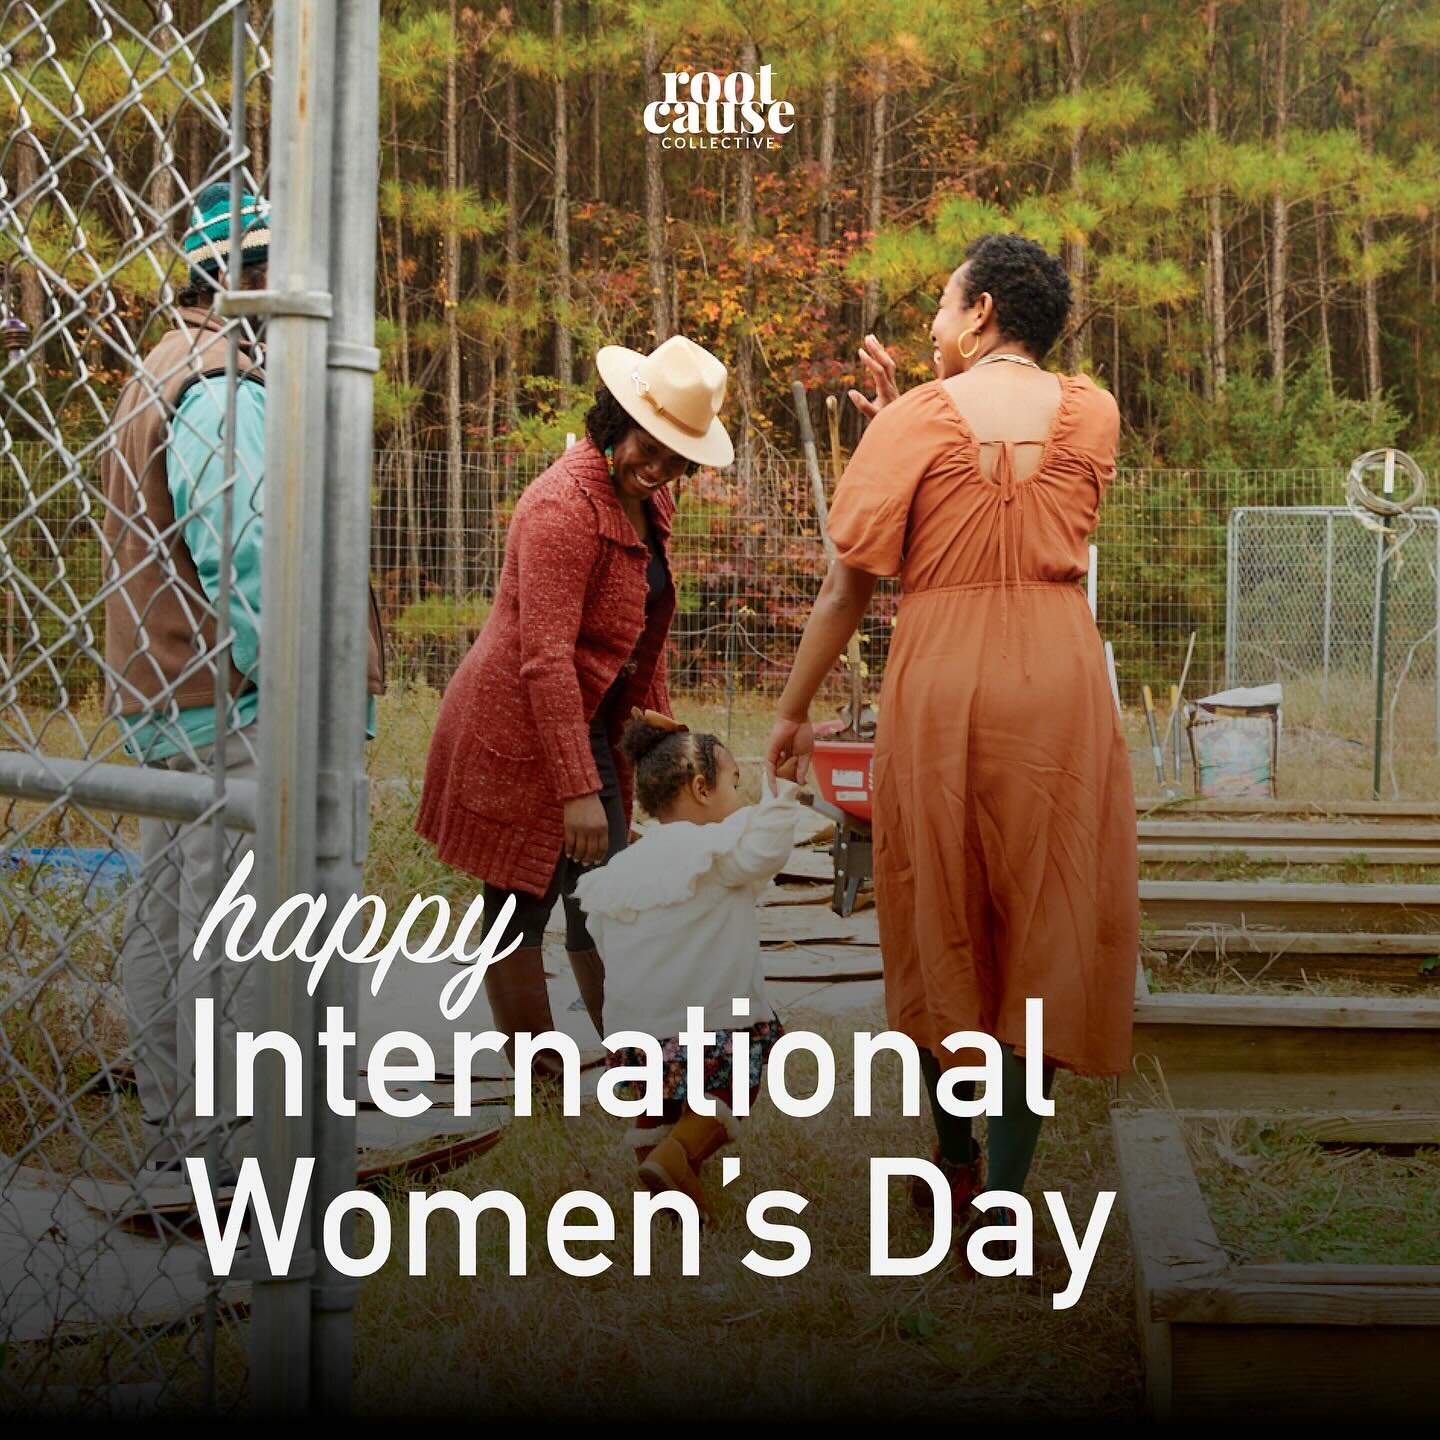 Proud to live out the legacy of the women who dreamed us into existence. 

Proud to live out the legacy of the women who came before us.

Proud to live out the legacy of the women who dared to break glass ceilings so that we could fly. 

#internation